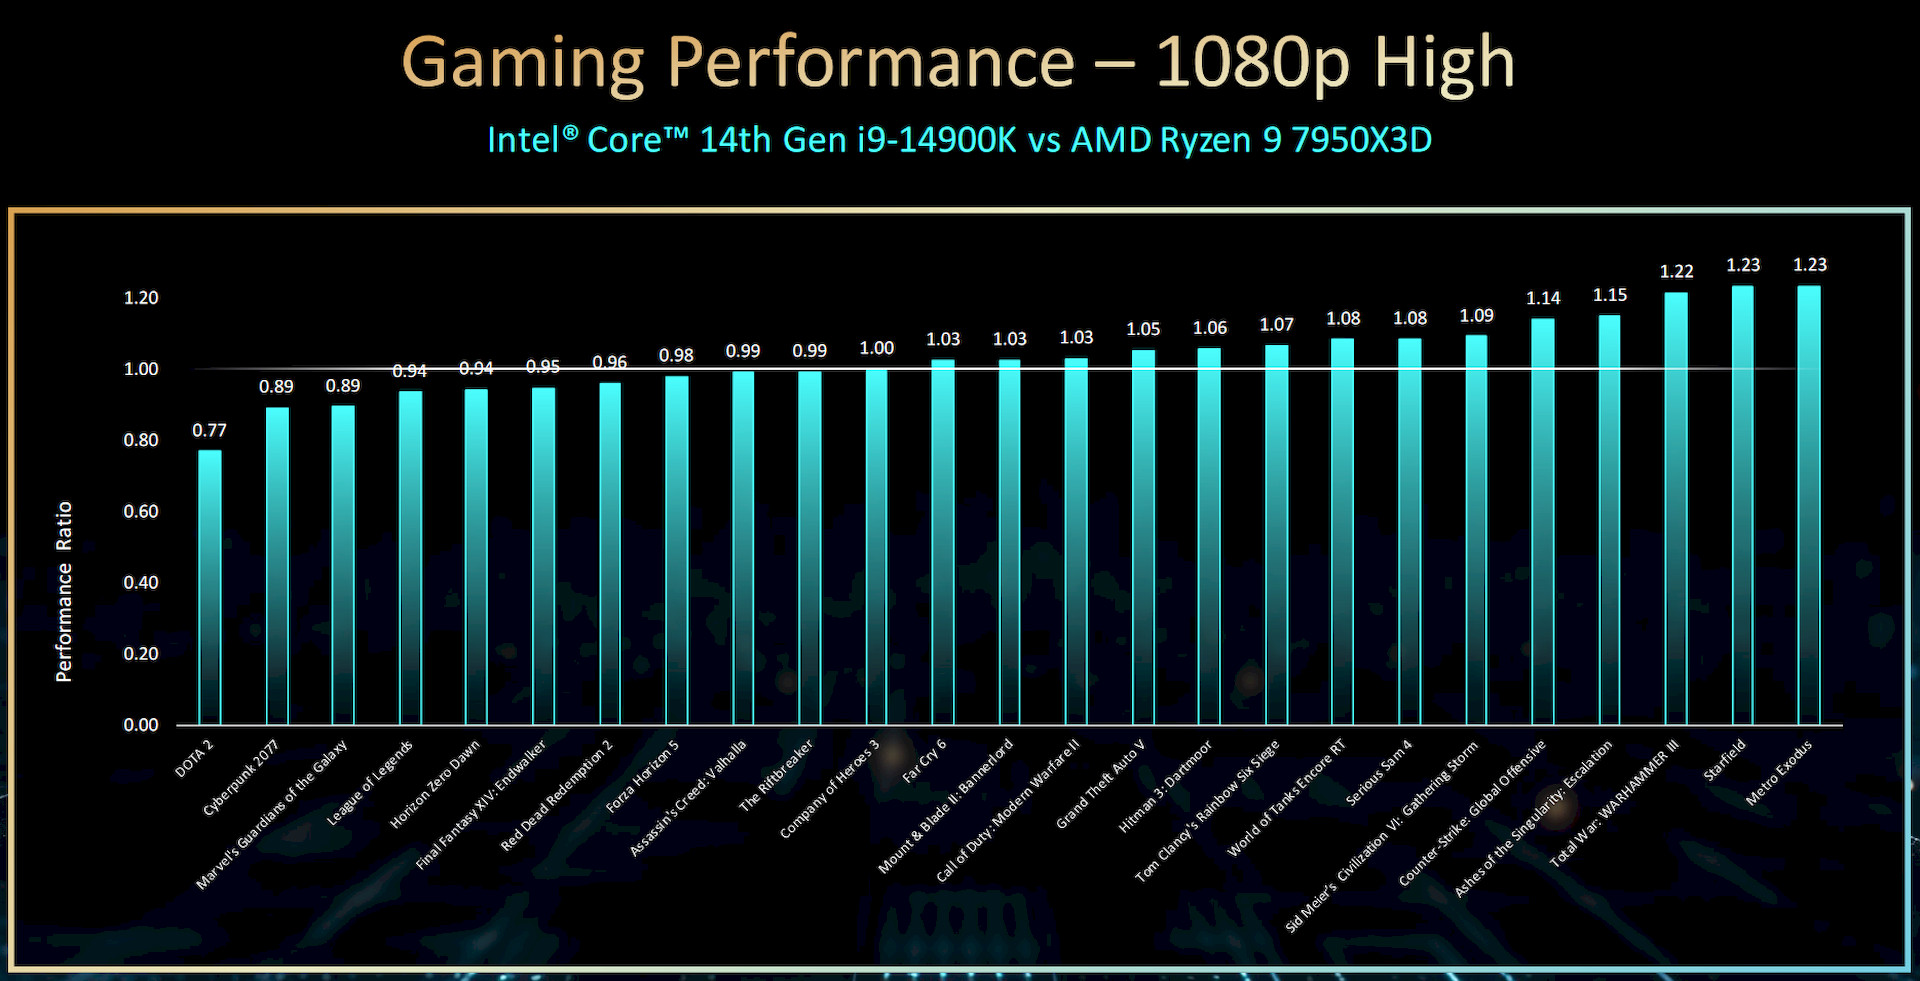 Intel's upcoming 14th Gen Core i7-14700KF CPU reached 6 GHz in a new  benchmark